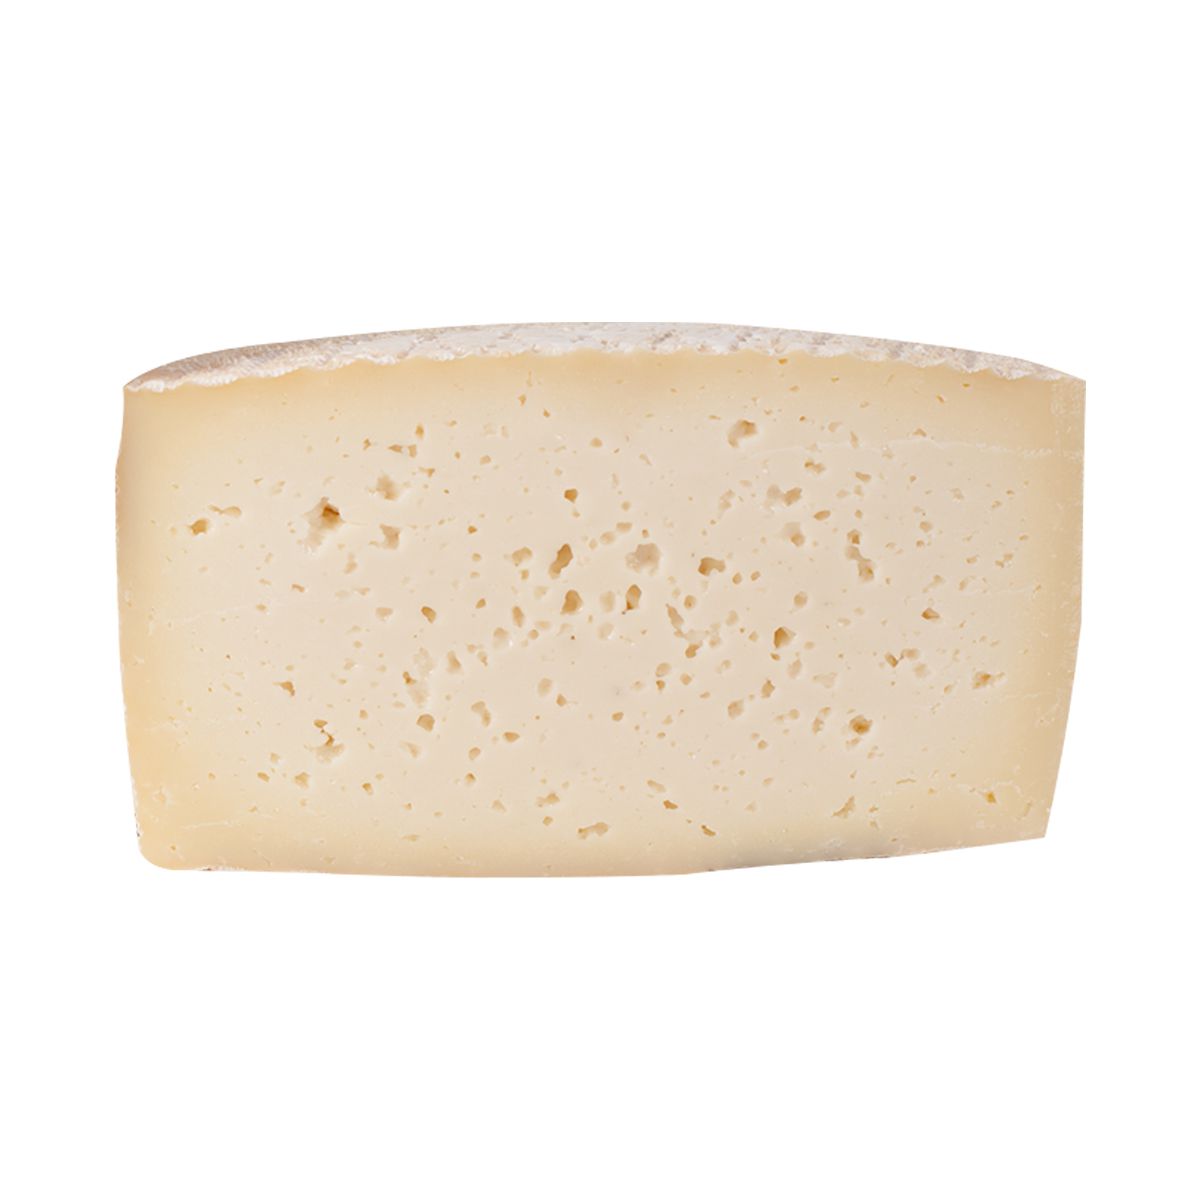 Artequeso Manchego Mini 4 Month Aged Cheese